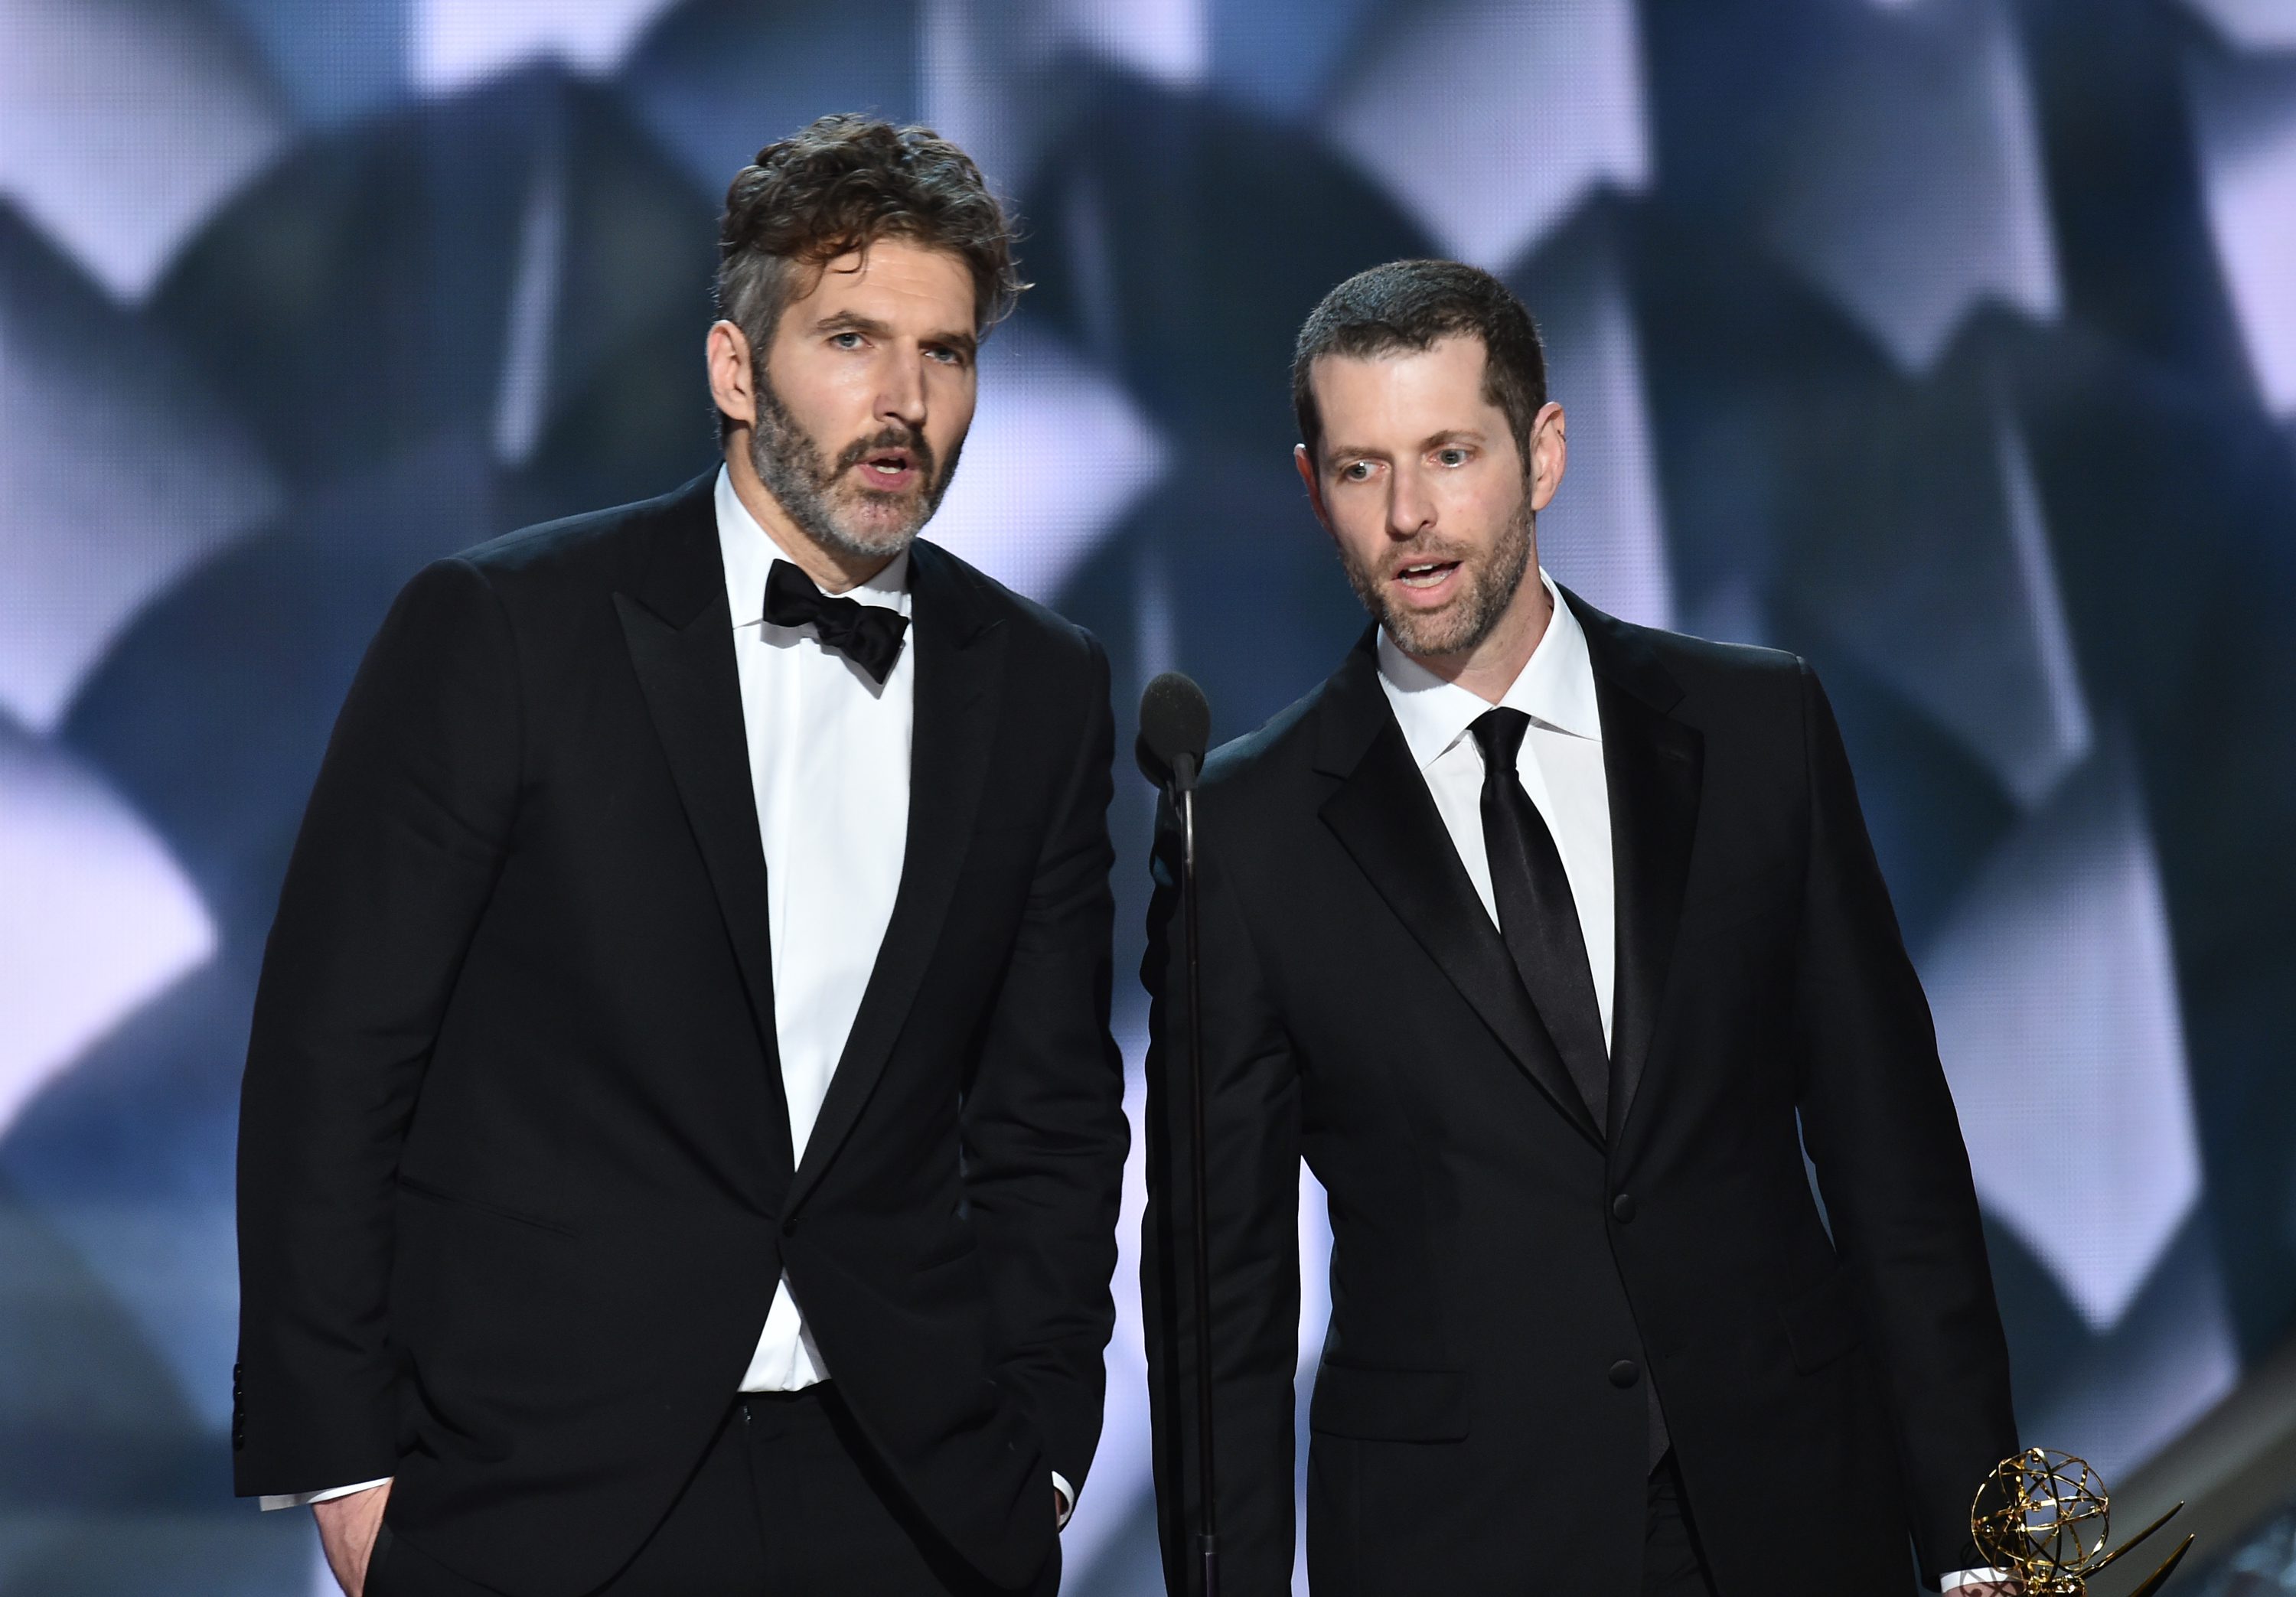 David Benioff and D.B. Weiss to Write, Direct Star Wars Trilogy